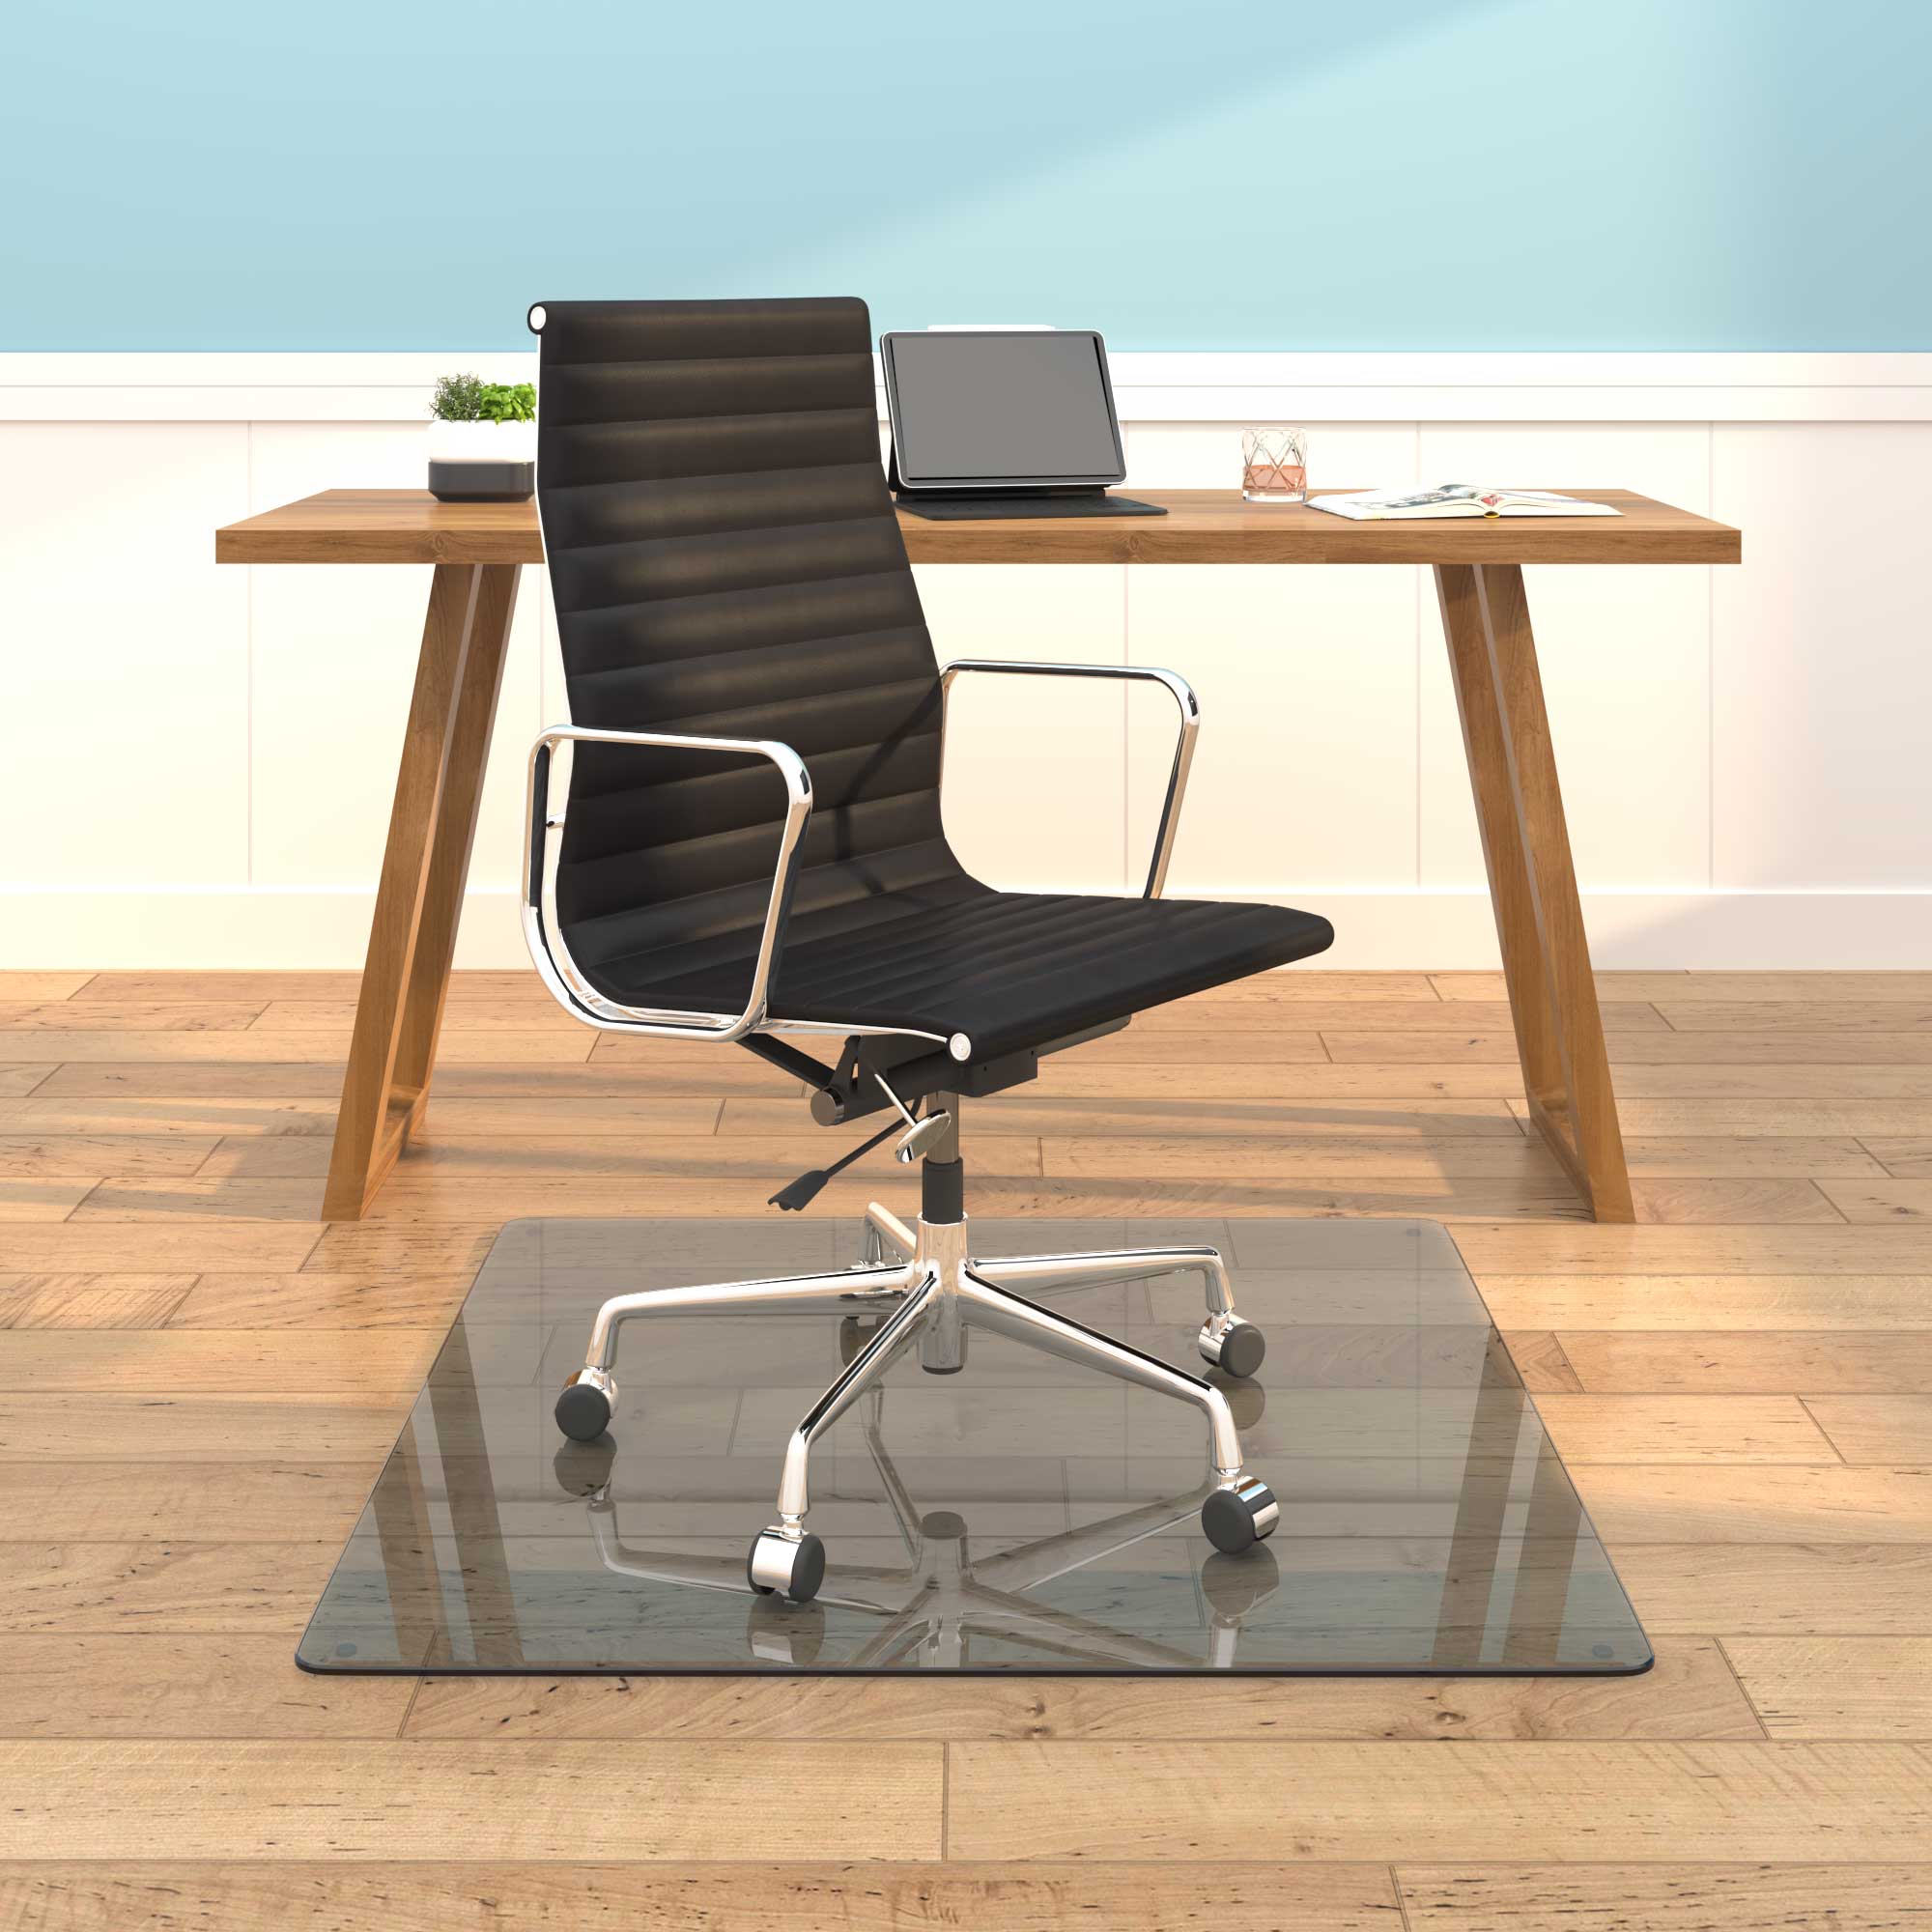 6mm Square Glass Chair Mat